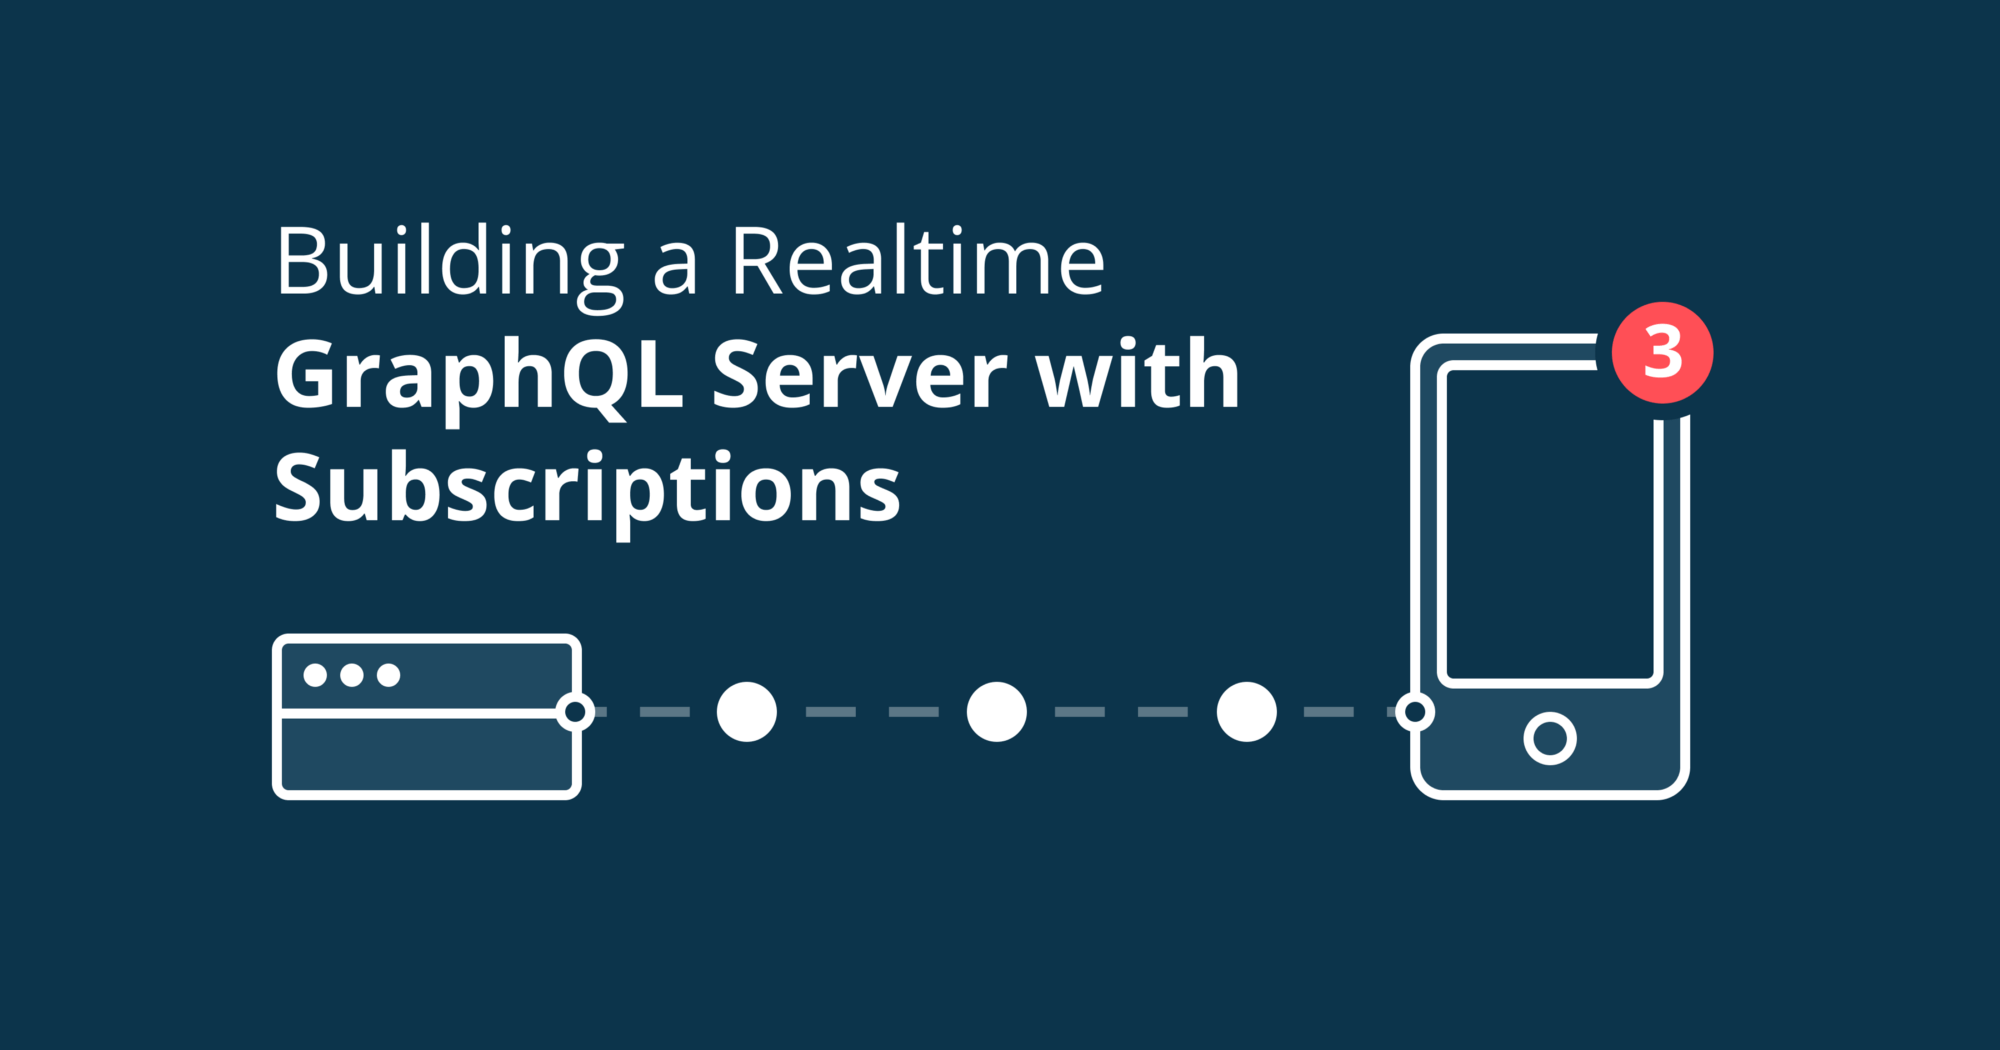 Tutorial: Building a Realtime GraphQL Server with Subscriptions